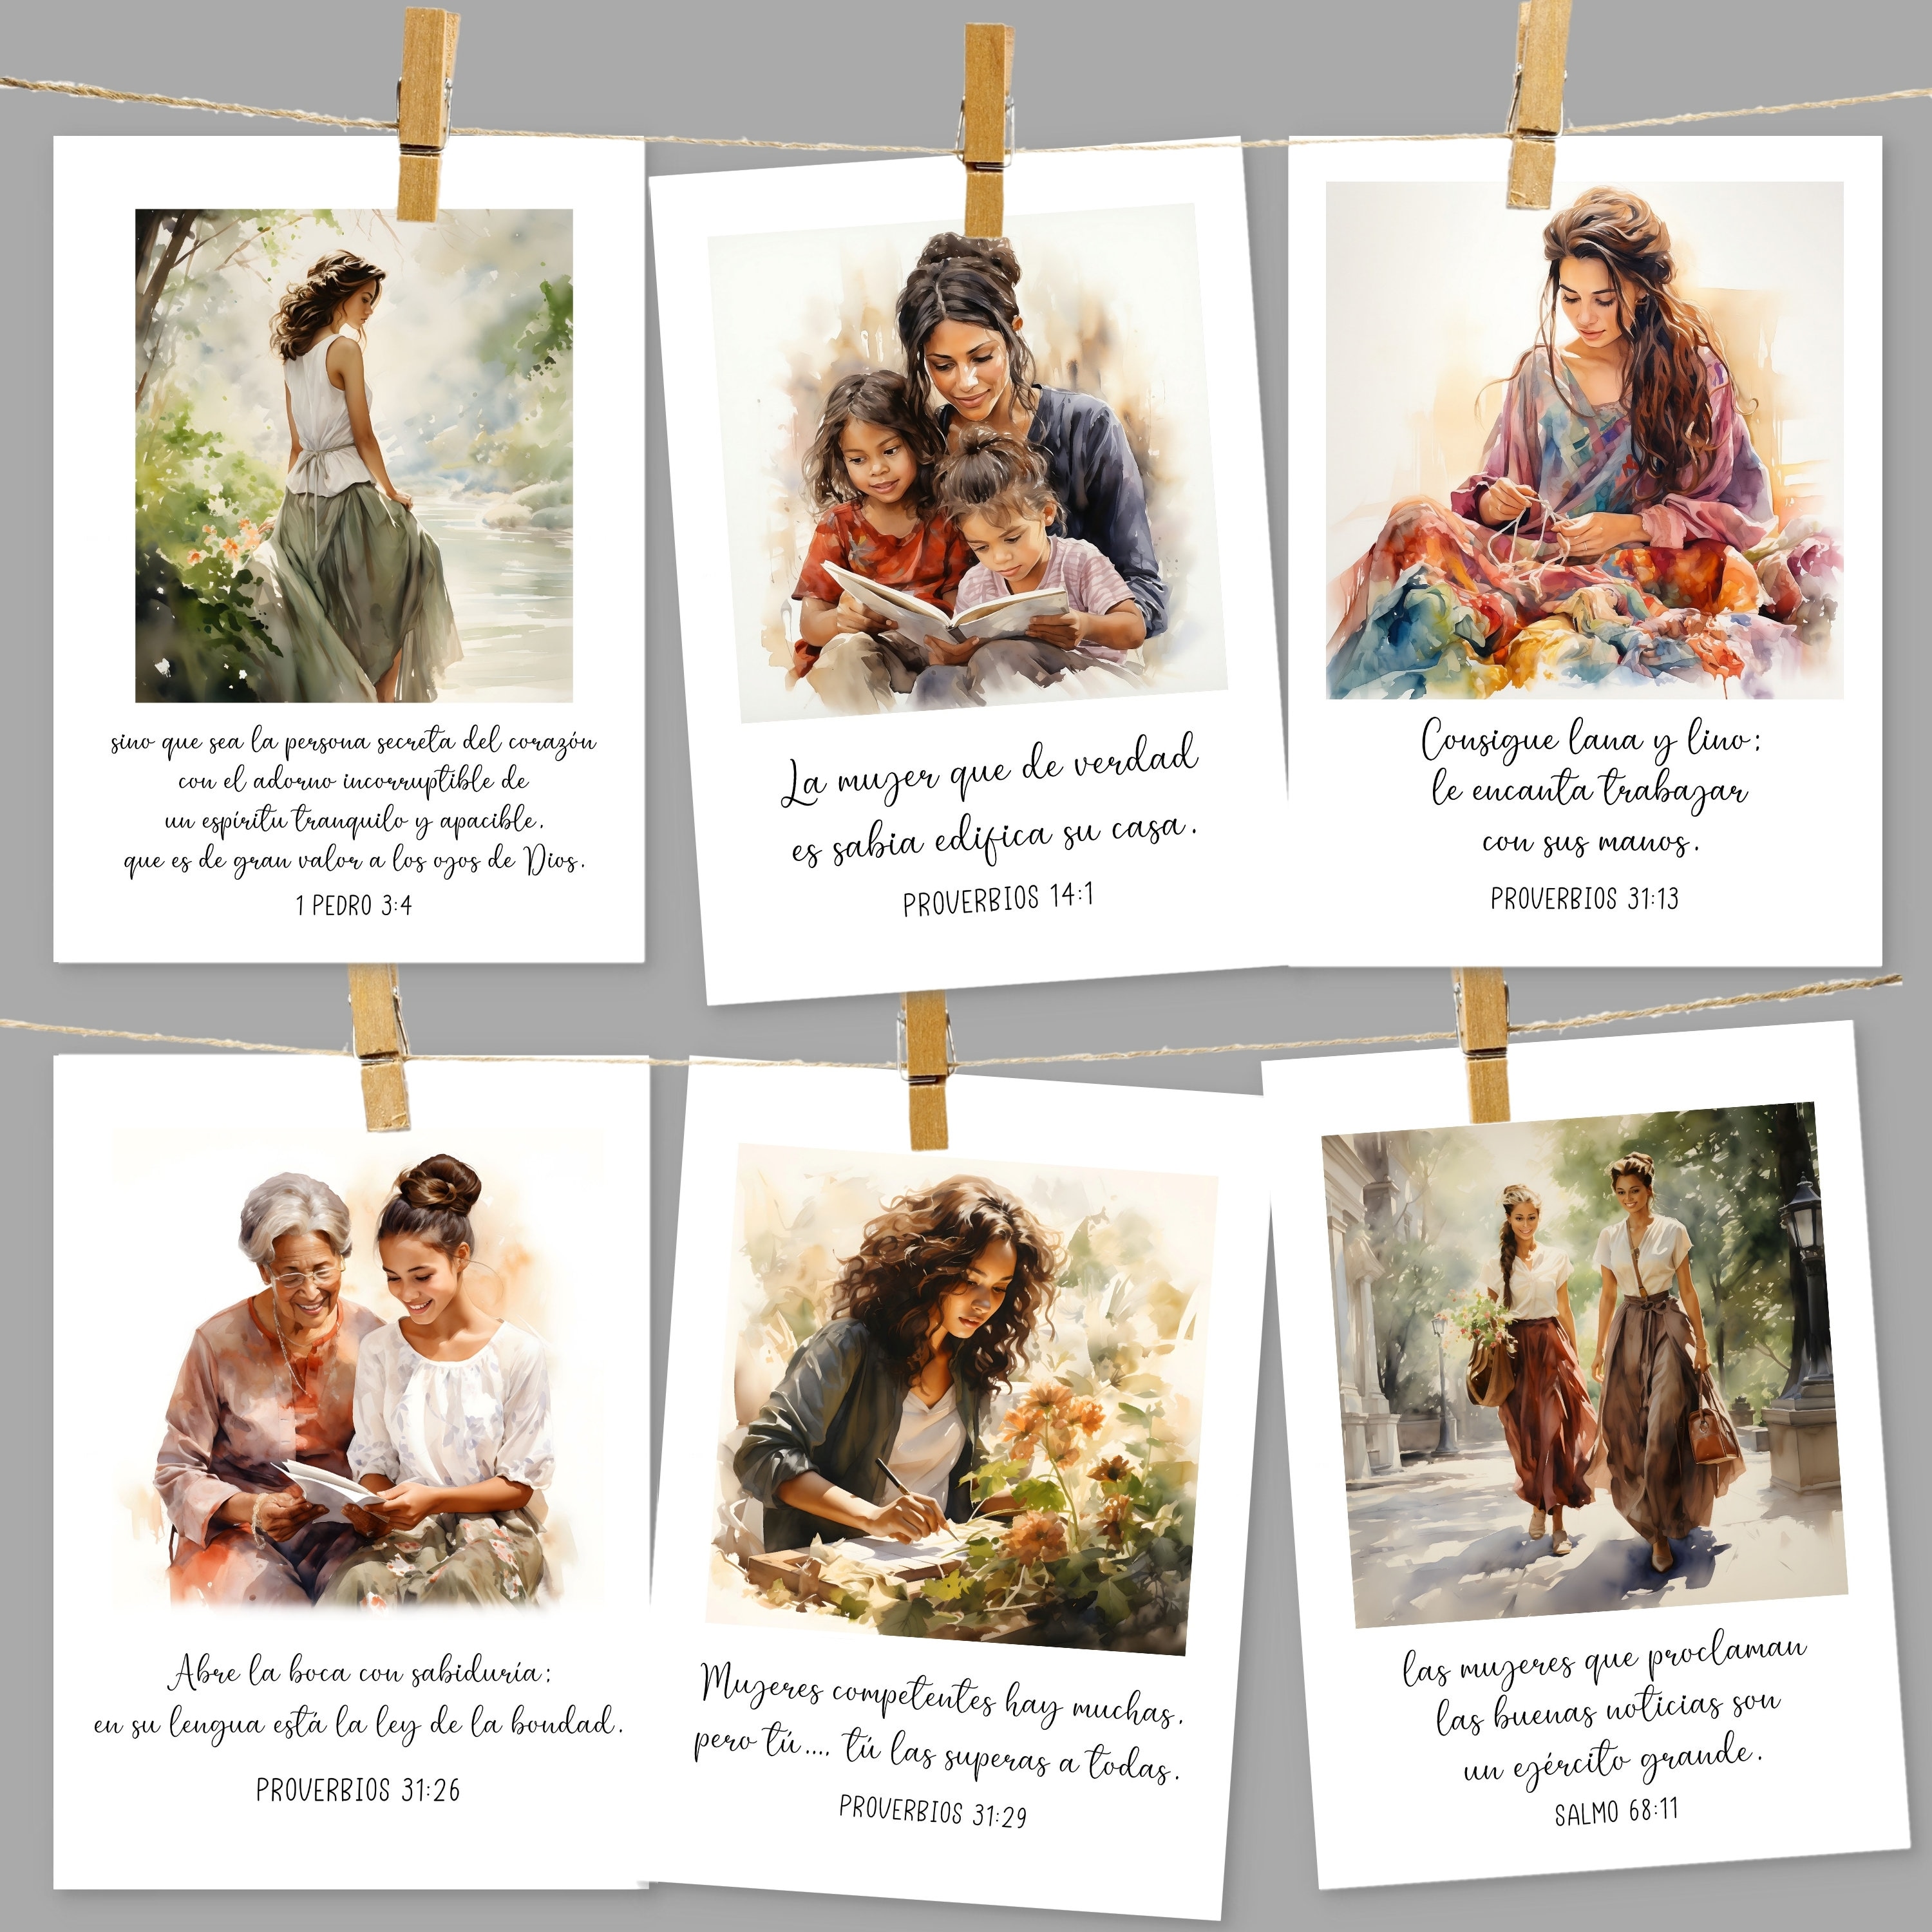  NewEights Spanish Christian Stickers for Women Series 2 (5  Sheet) - Total 60 pcs (5 x 12pcs) Individual Small Size 2.1 x 2 Inches,  Unique Designs, Spanish Stickers Perfect for Women Ministries : Office  Products